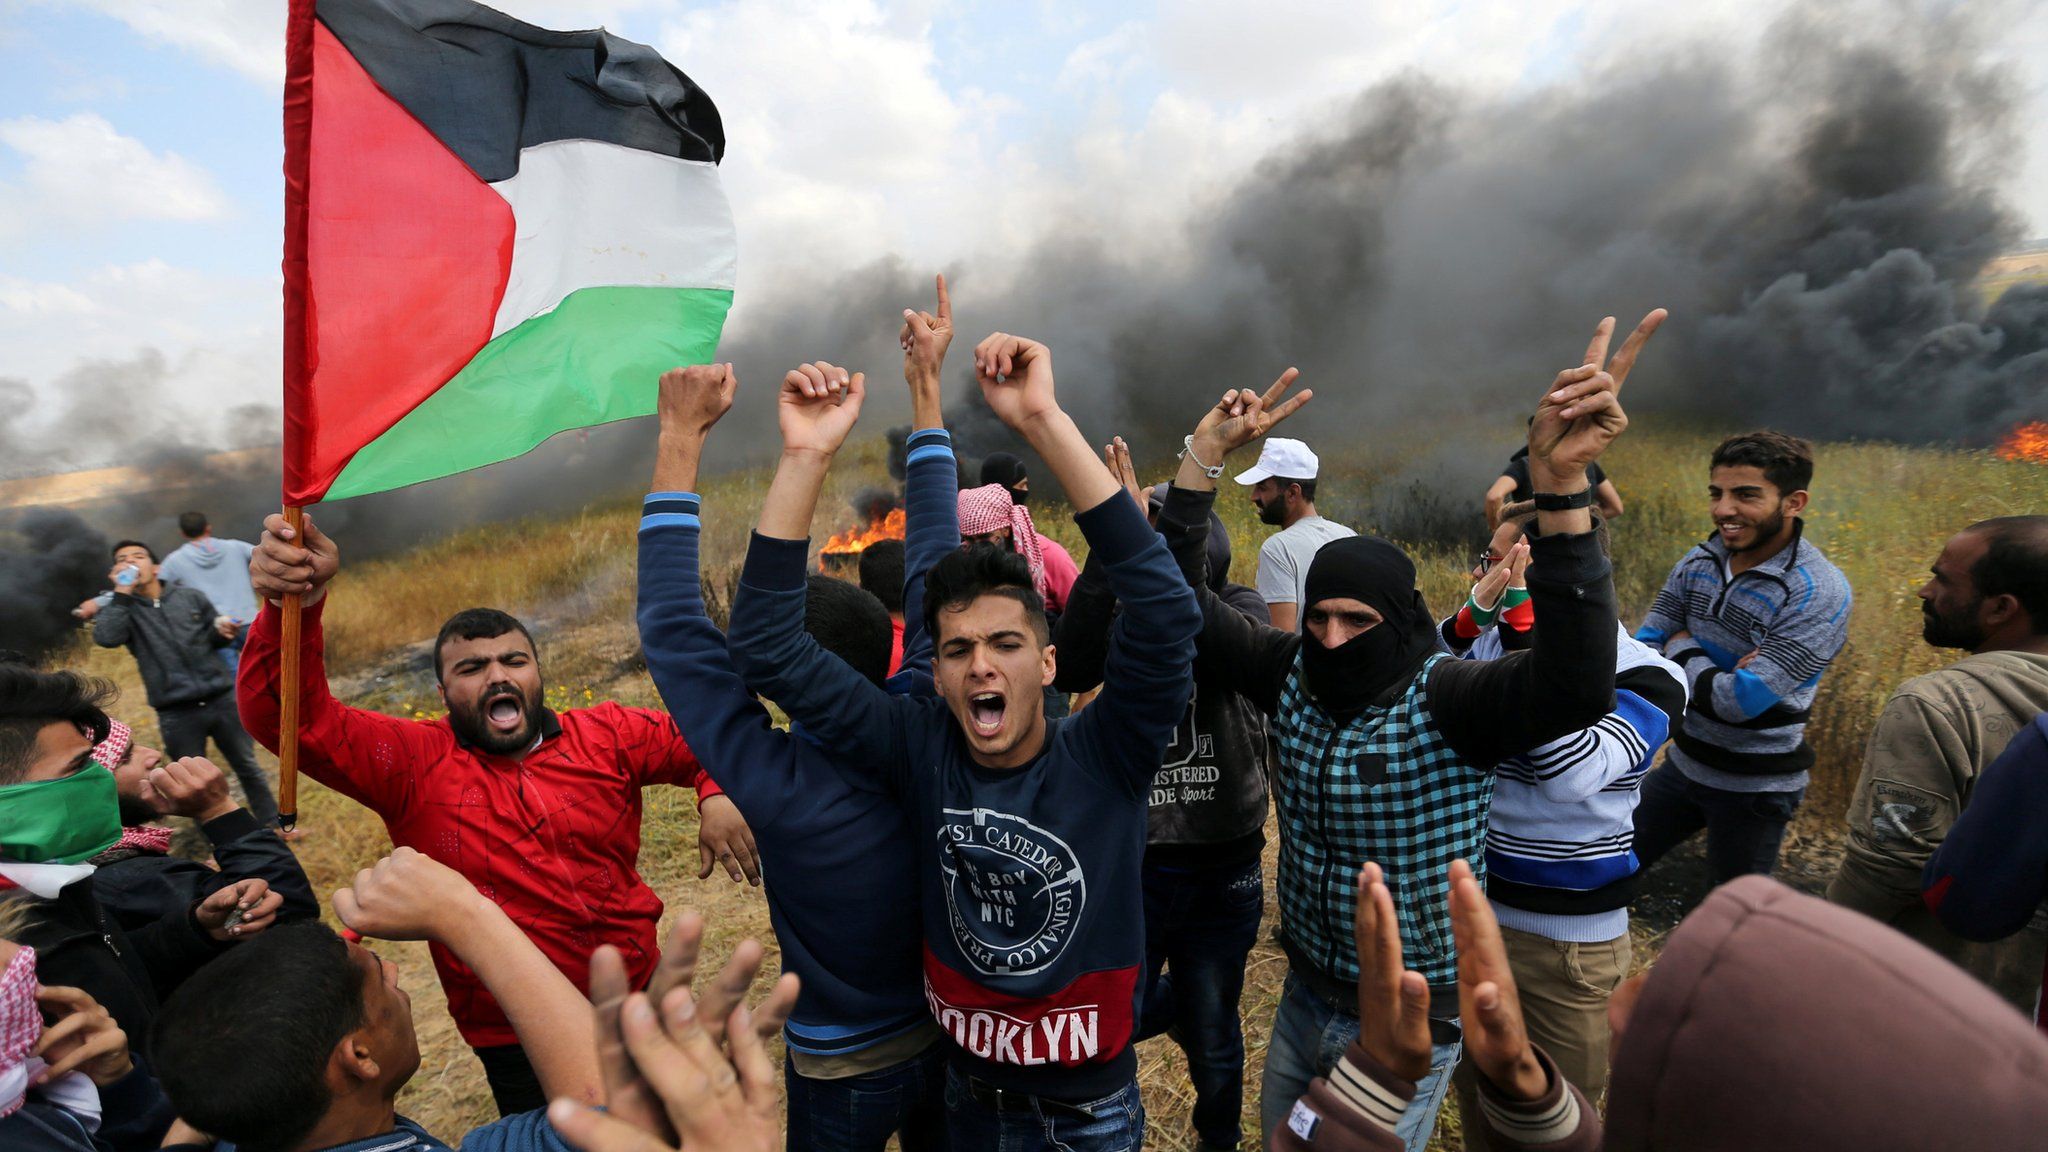 Palestinians shout during clashes with Israeli troops, during a protest along the Israel border with Gaza, March 30 2018